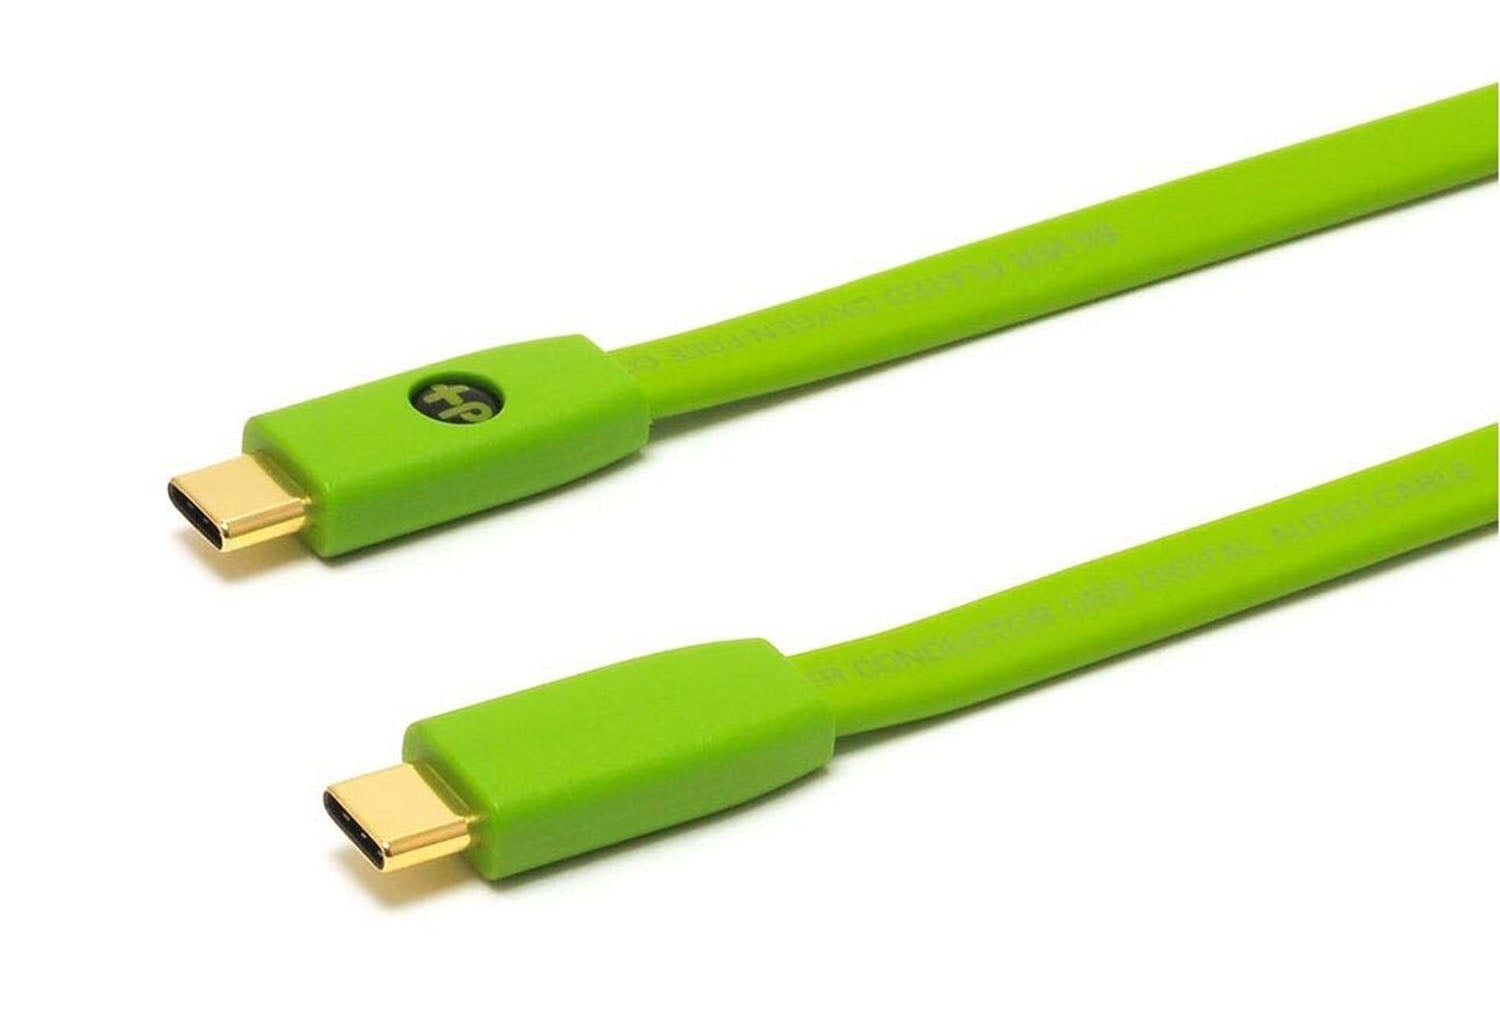 Oyaide Neo d+ USB 2.0 Type-C to Type-C Class B Cable 2M - Hollywood DJ